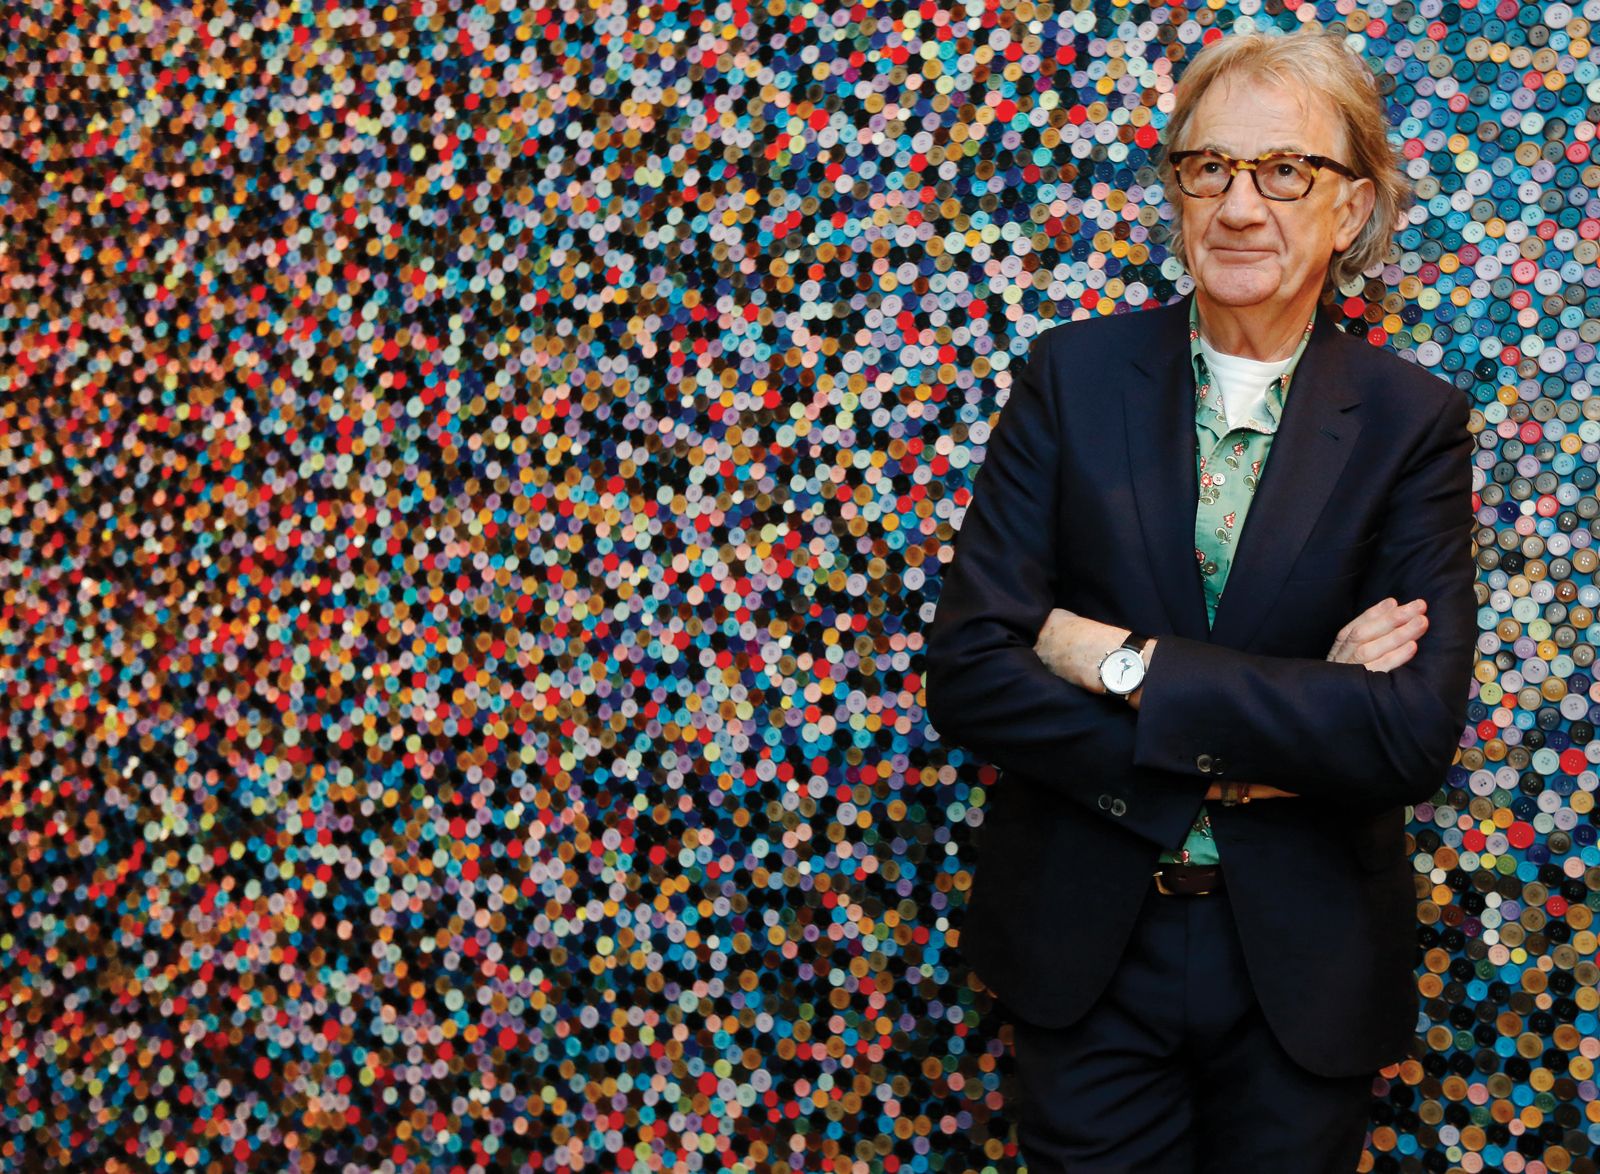 Paul Smith gets wrapped up in the work of the Bauhaus